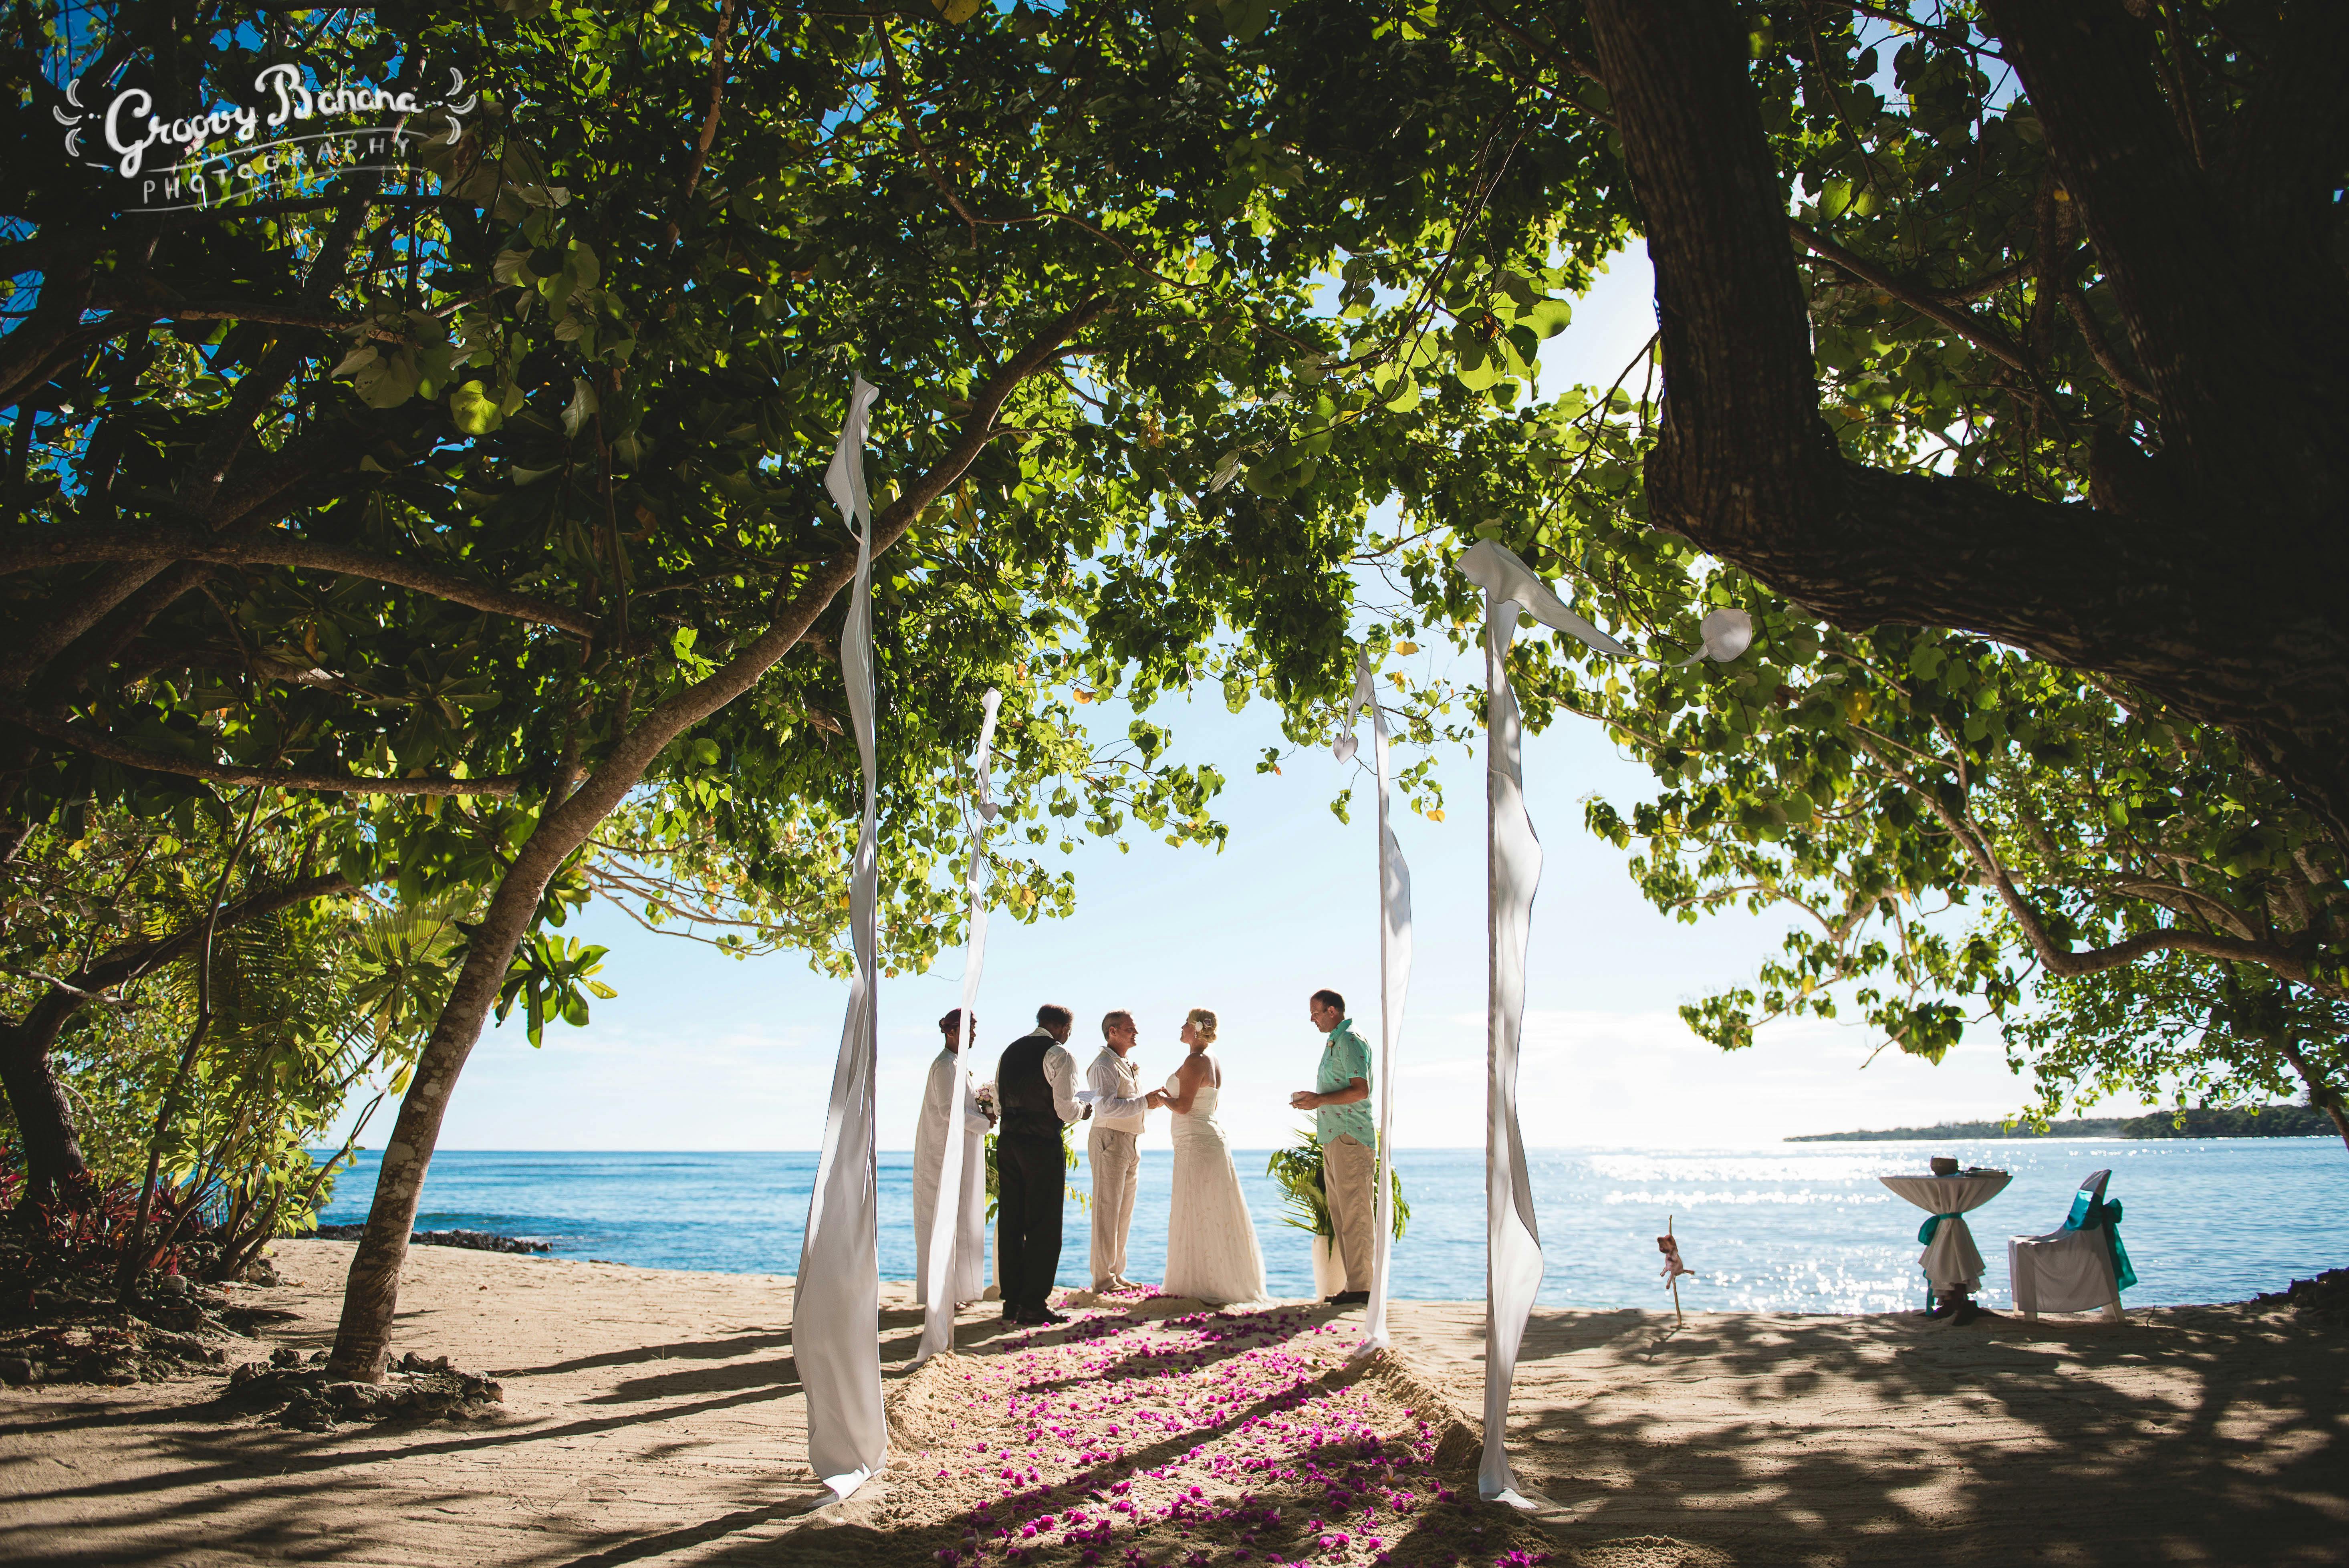 Sunset Beach, scattered floral aisle and Bali Flags #erakorbeachweddings #weddingceremonyonthebeachsouthpacific